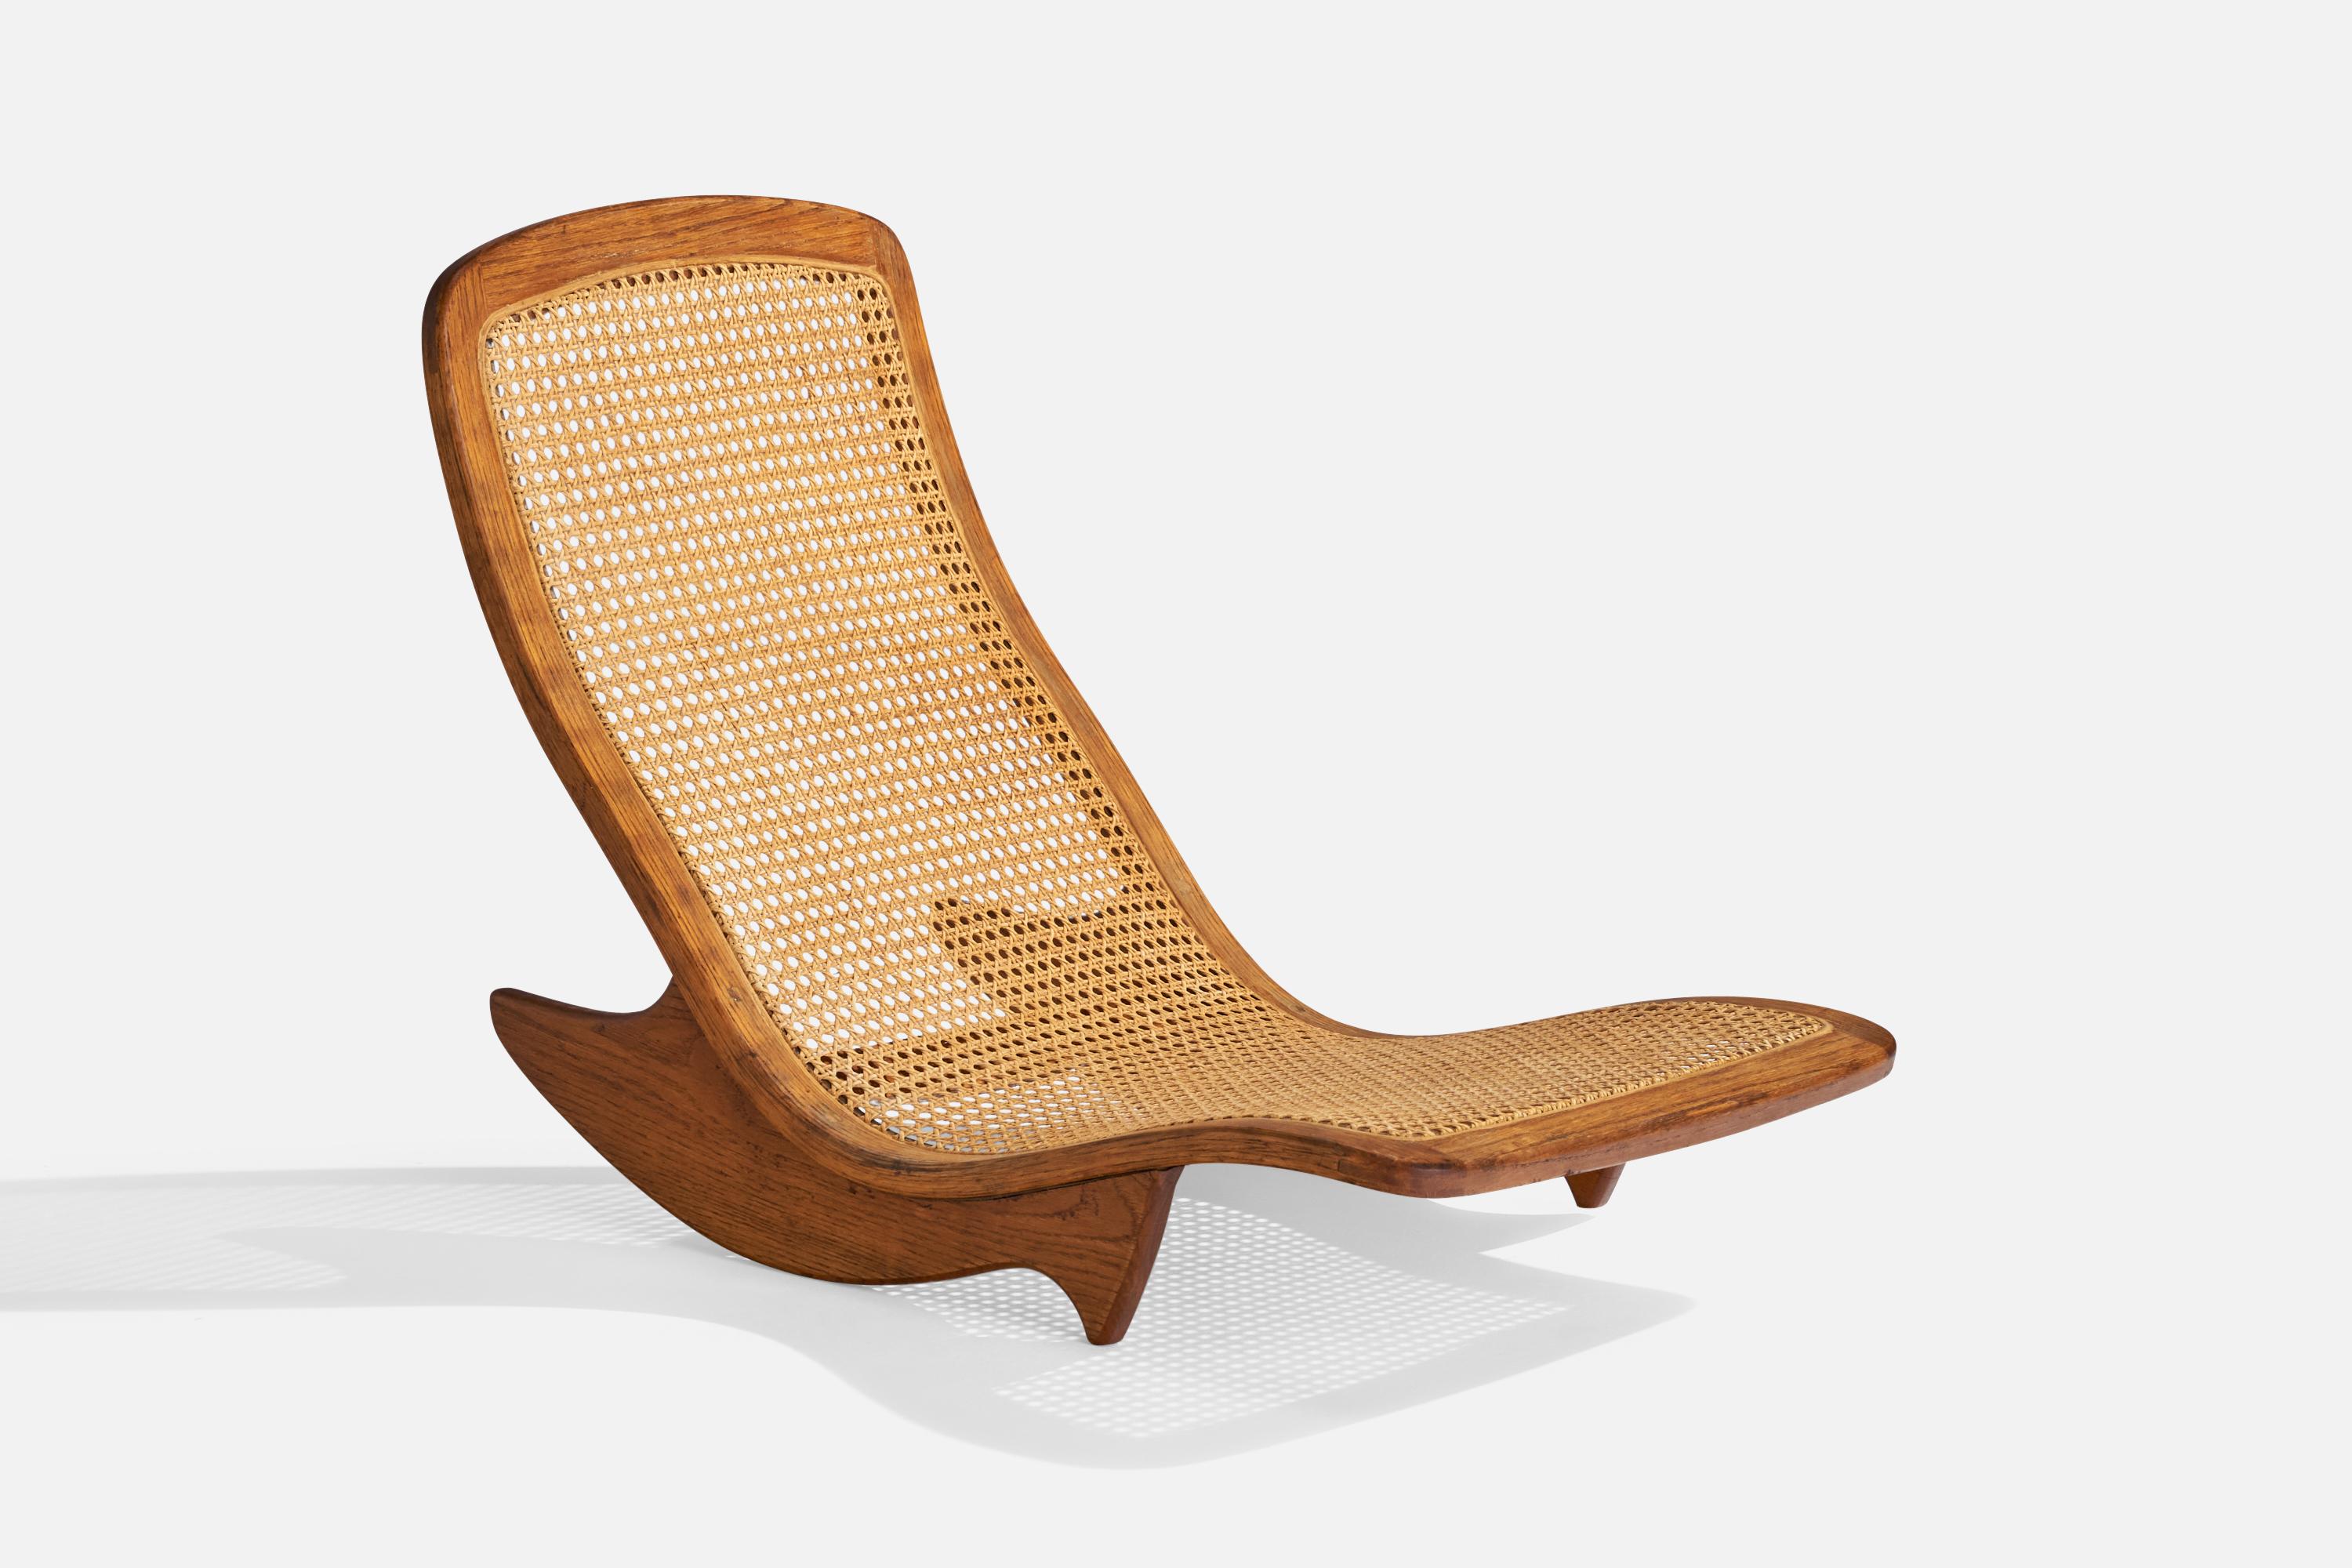 A teak and rattan rocking low chair or chaise longue designed and produced by Steve Rieman, USA, c. 1976

Seat height 5”.